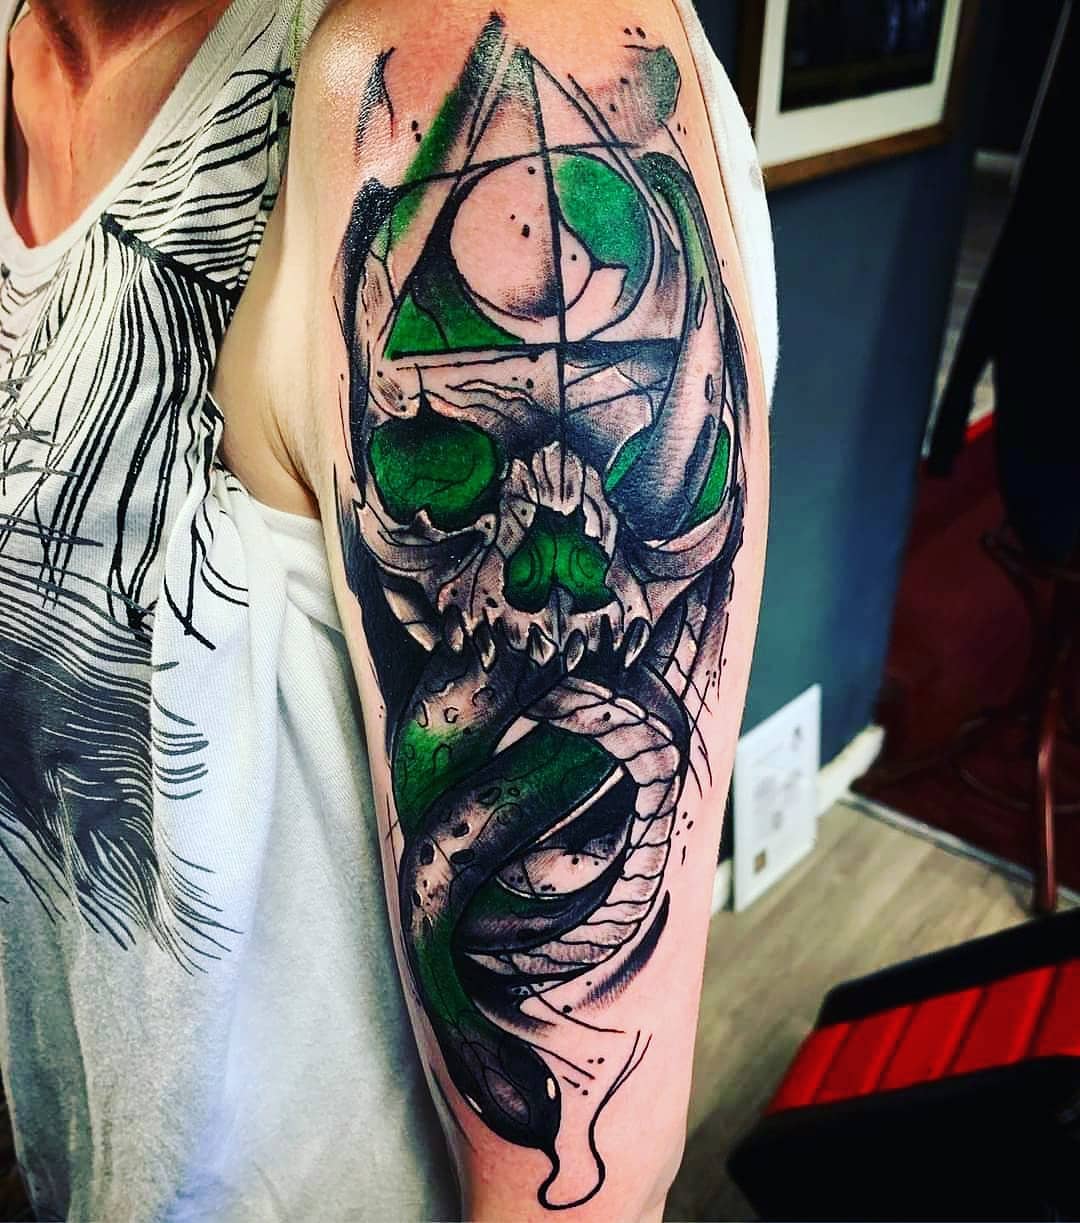 Not everyone is brave to cover up his body with a tattoo, right? If you are one of those who wants to try it, one of the best tattoo is definitely death eater! It will stay with you forever on your arm!